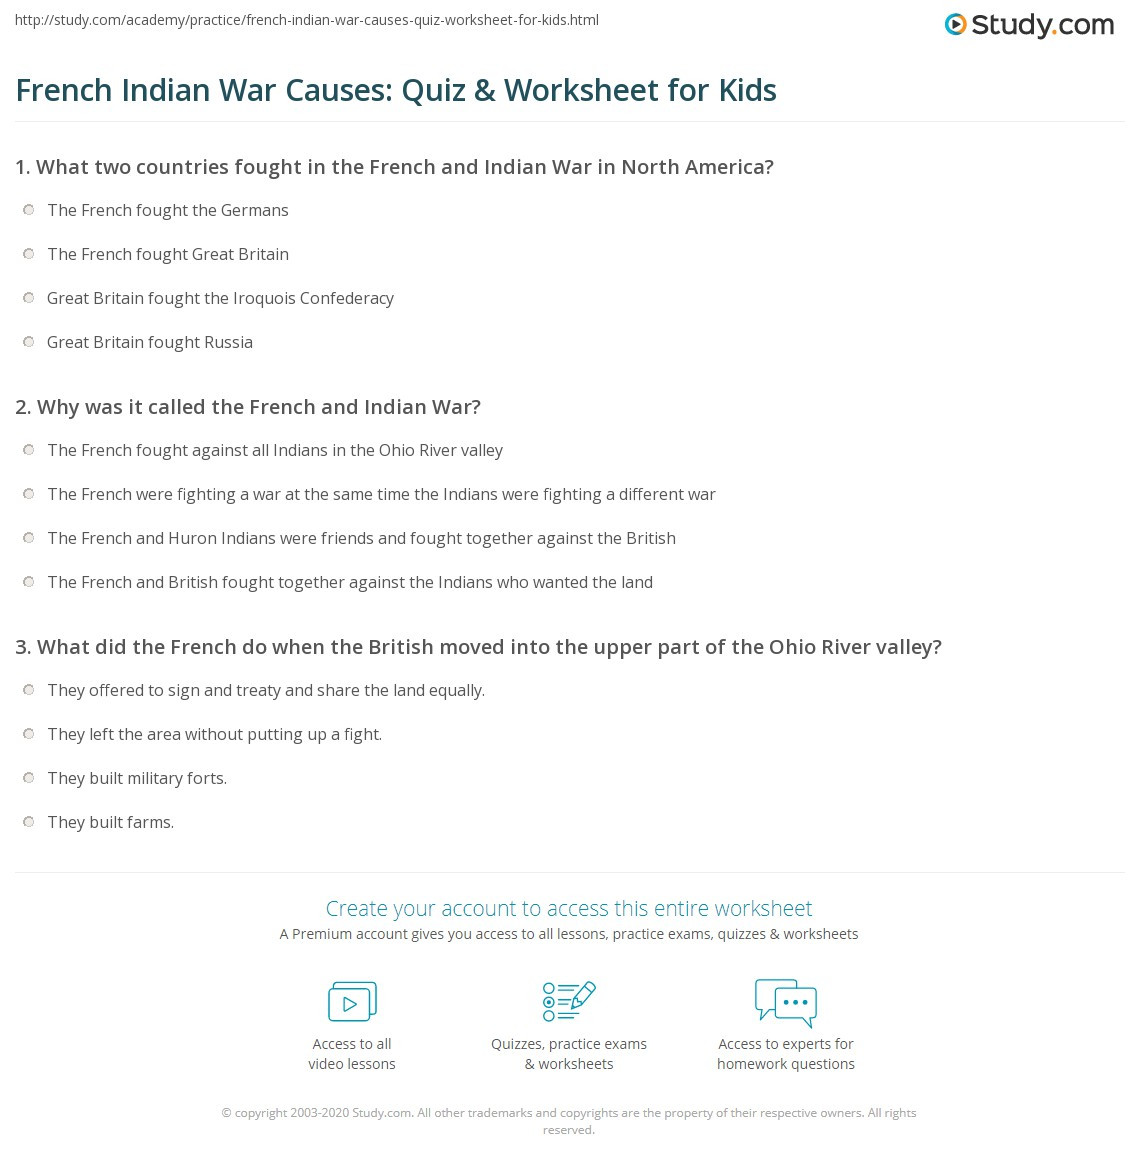 French and Indian War Worksheet French Indian War Causes Quiz &amp; Worksheet for Kids